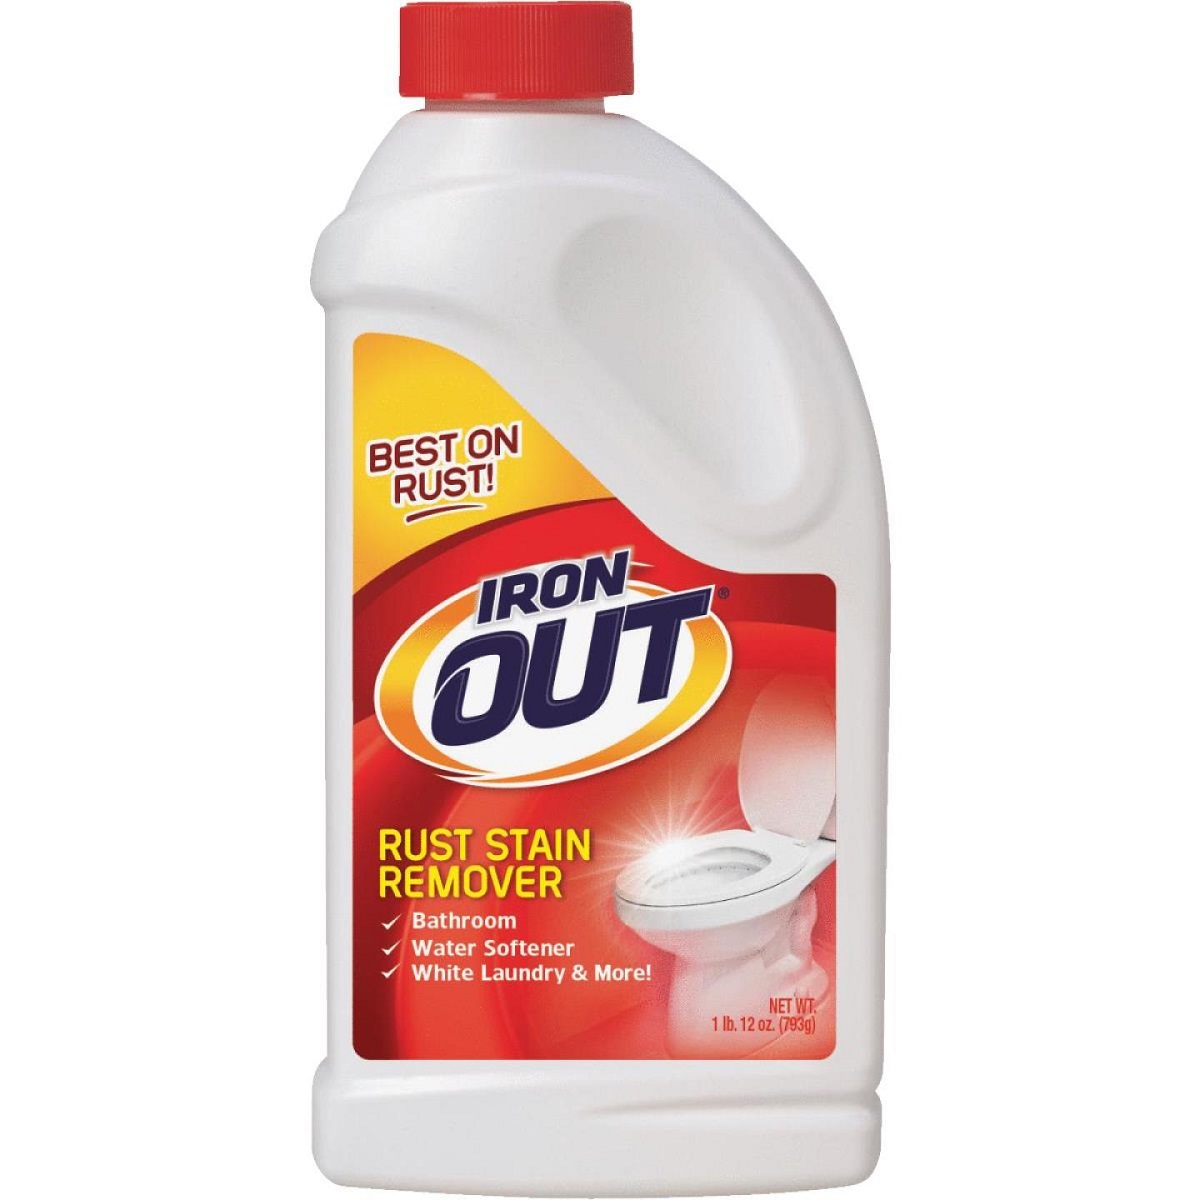 Iron Out 28 Oz. All-Purpose Rust and Stain Remover | Berings